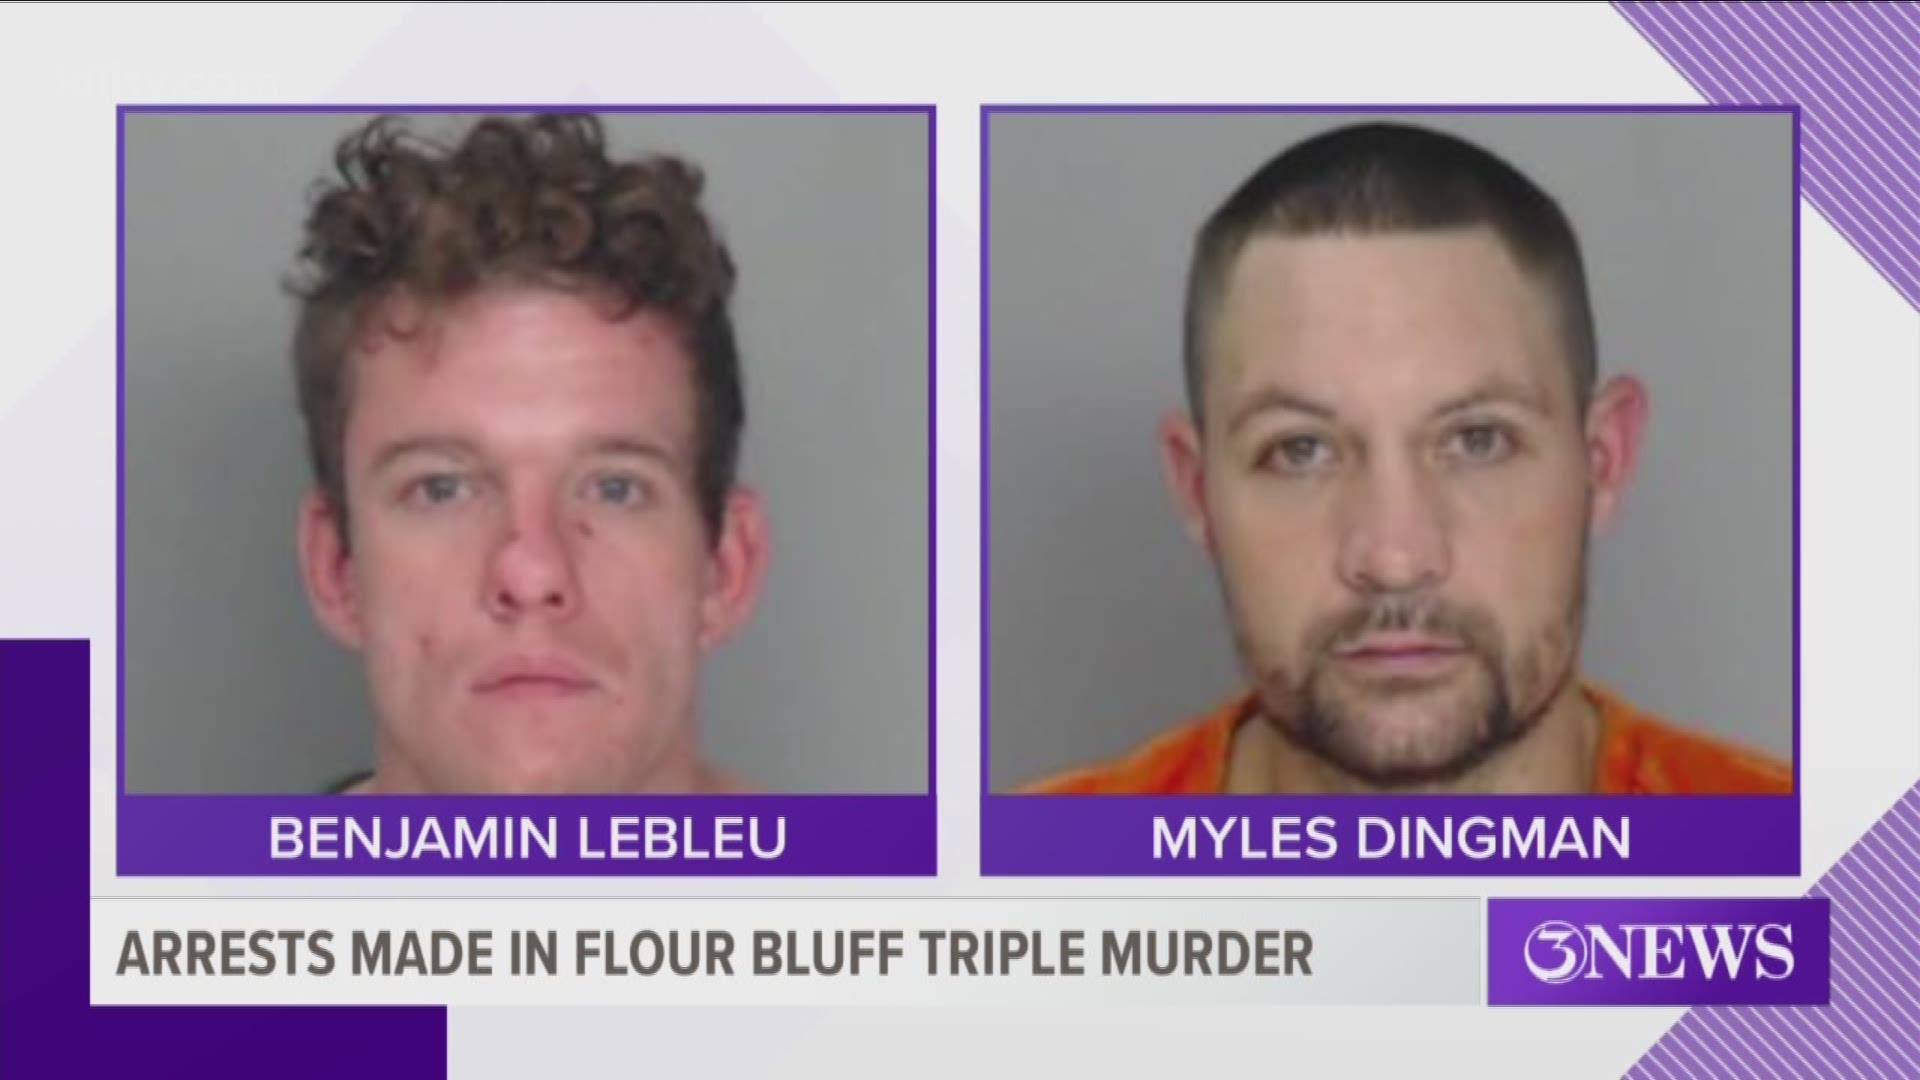 The bodies of three men were found in a house on Friday night in Flour Bluff.